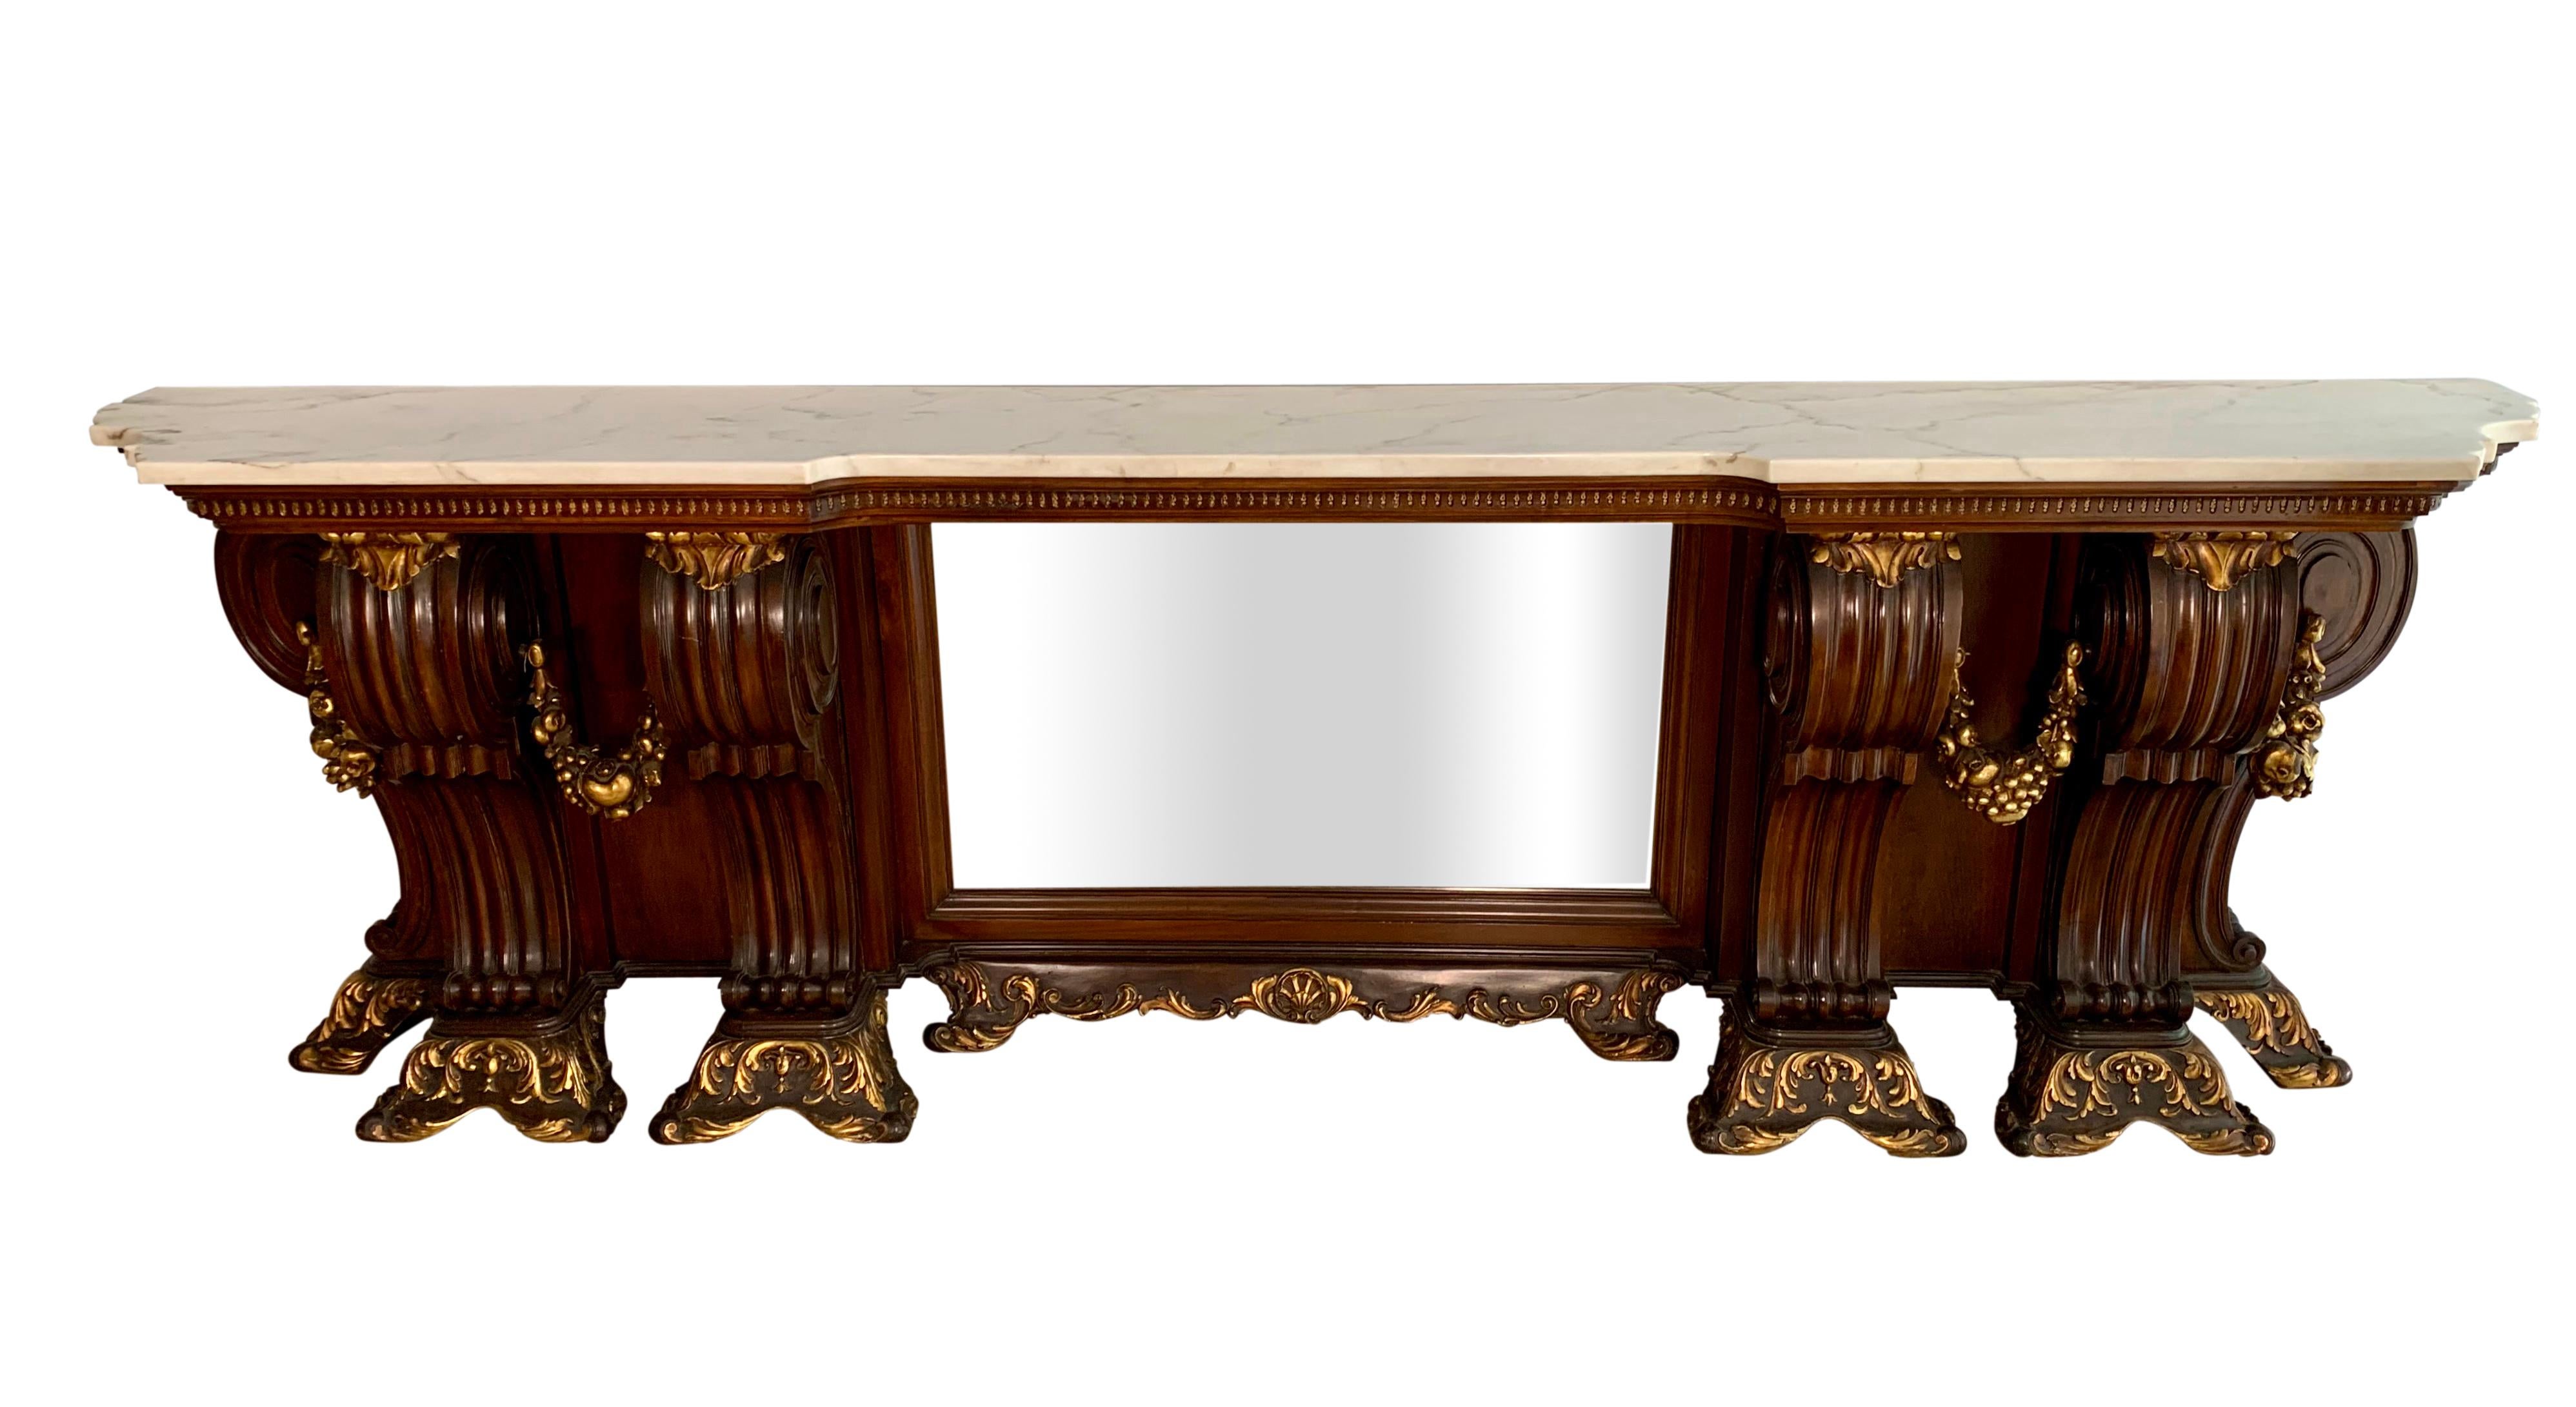 A Large Venetian Style Italian Carved Wood & Marble Top Console Table For Sale 3